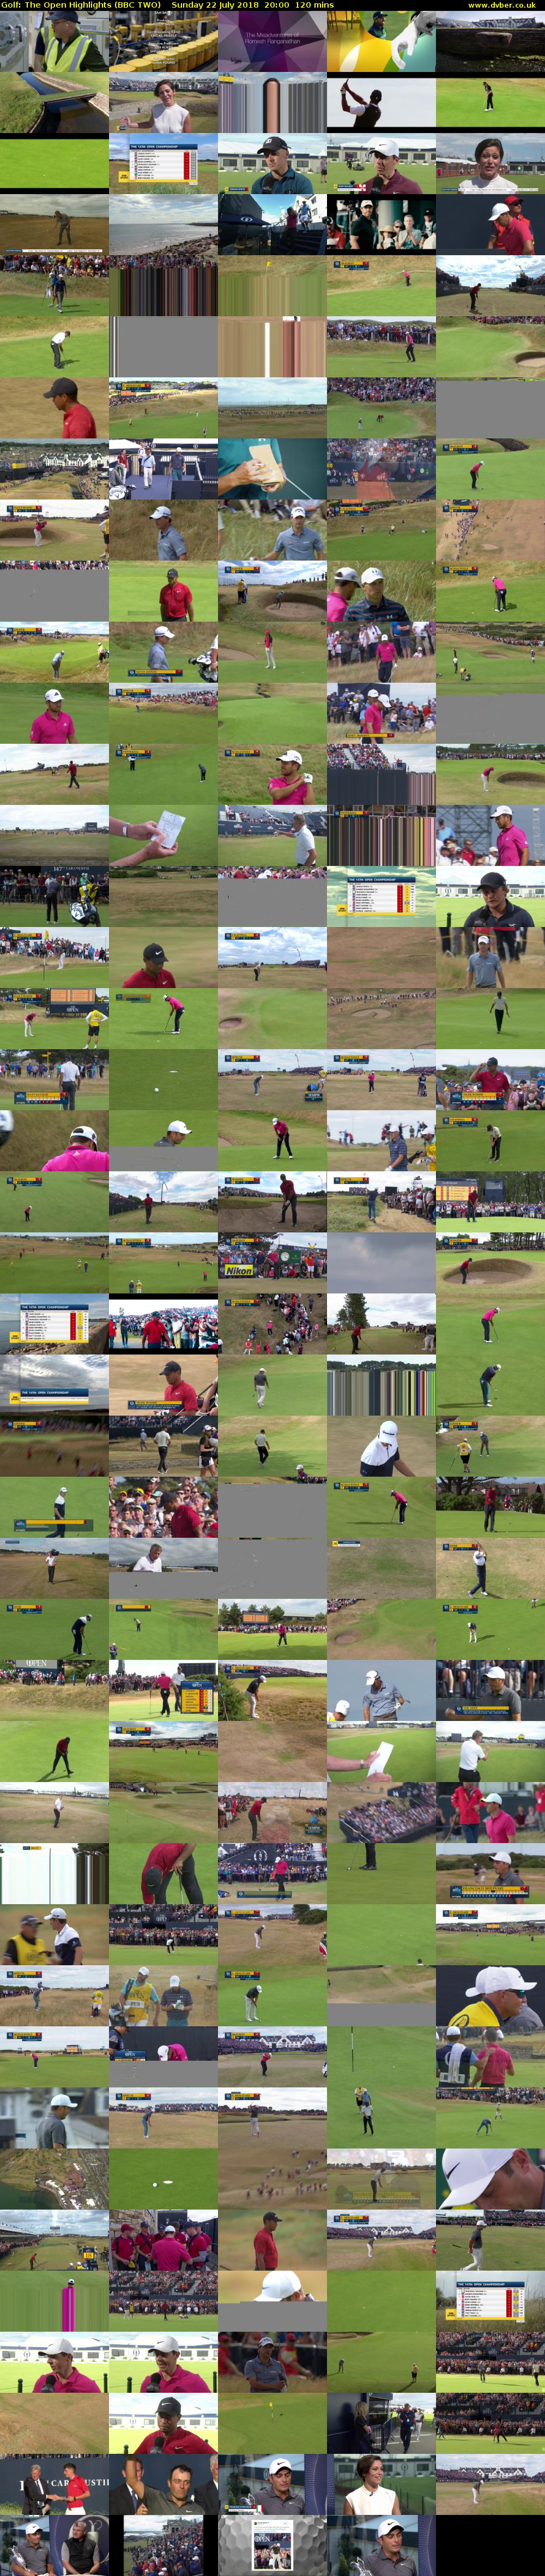 Golf: The Open Highlights (BBC TWO) Sunday 22 July 2018 20:00 - 22:00